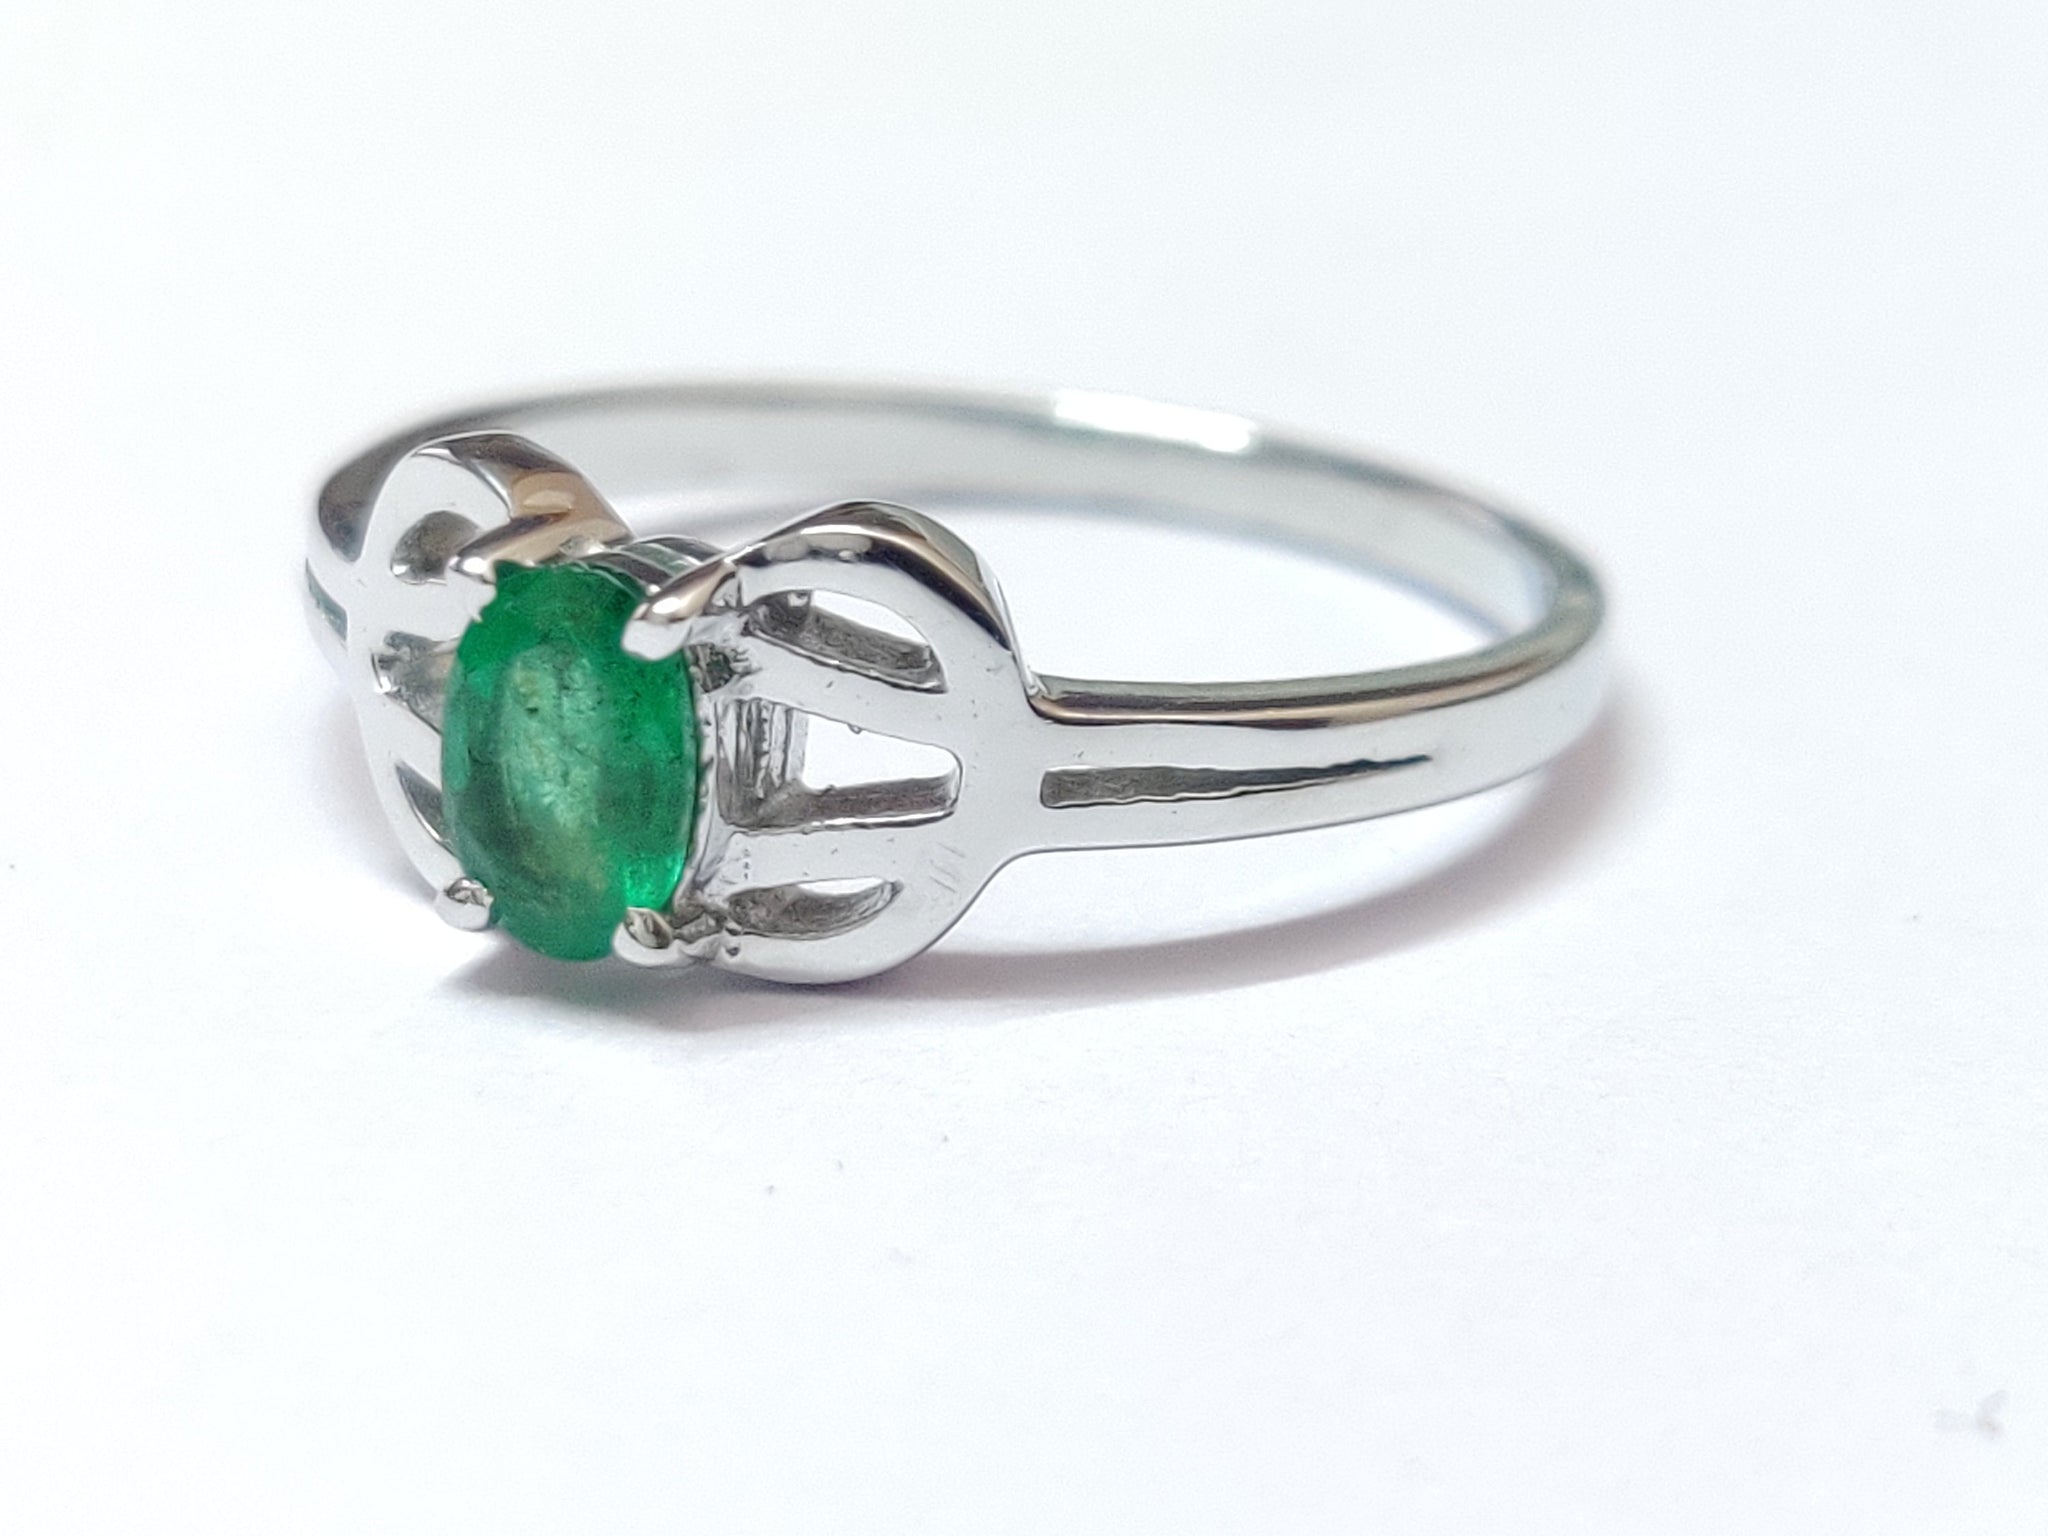 Tiny Emerald Ring Silver Emerald Dainty Ring 0.5 Ct Emerald  Genuine Emerald Ring Natural Emerald Ring 4x6 mm Oval Emerald Ring For Women